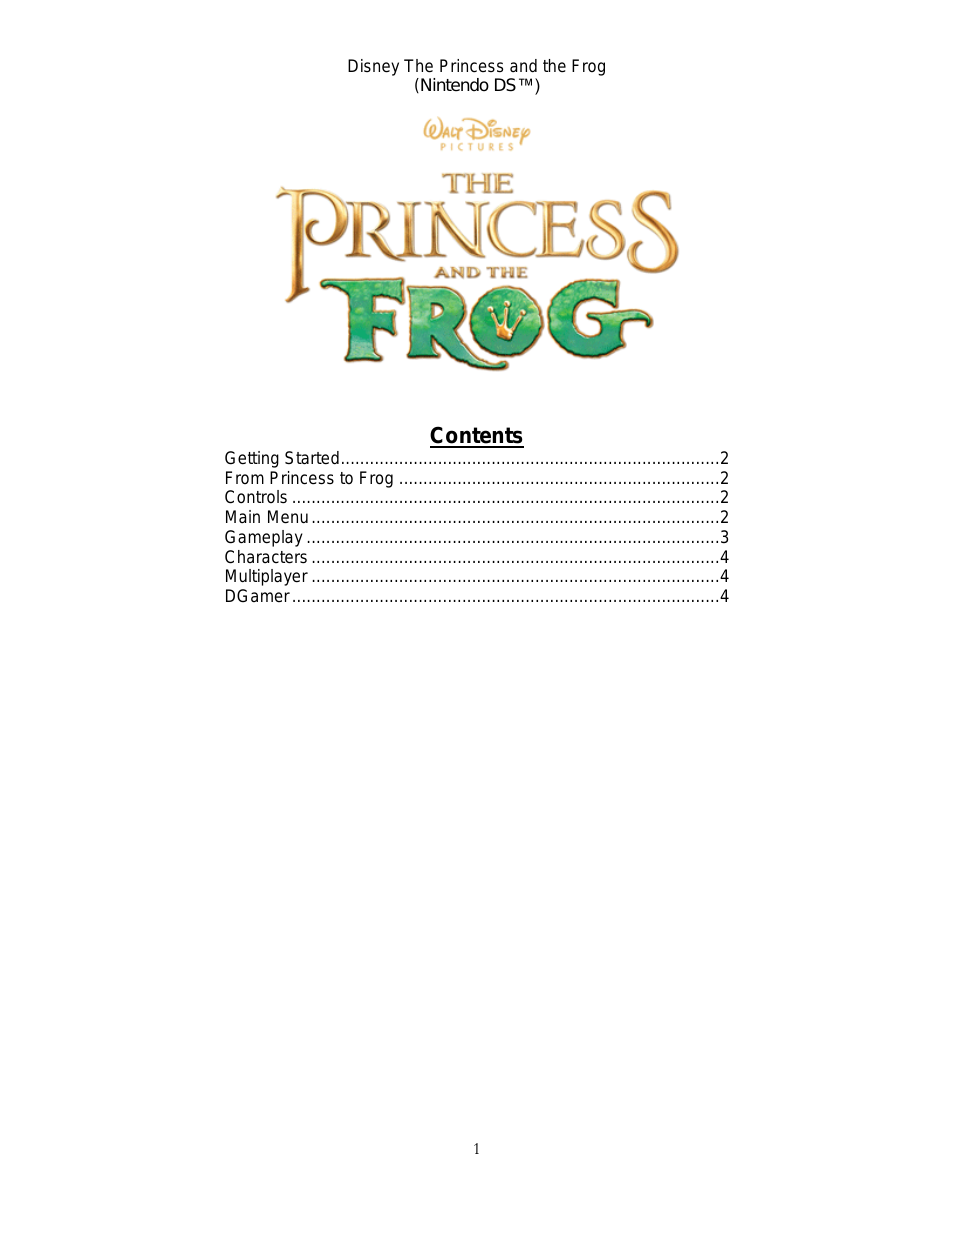 The Princess and the Frog for Nintendo DS